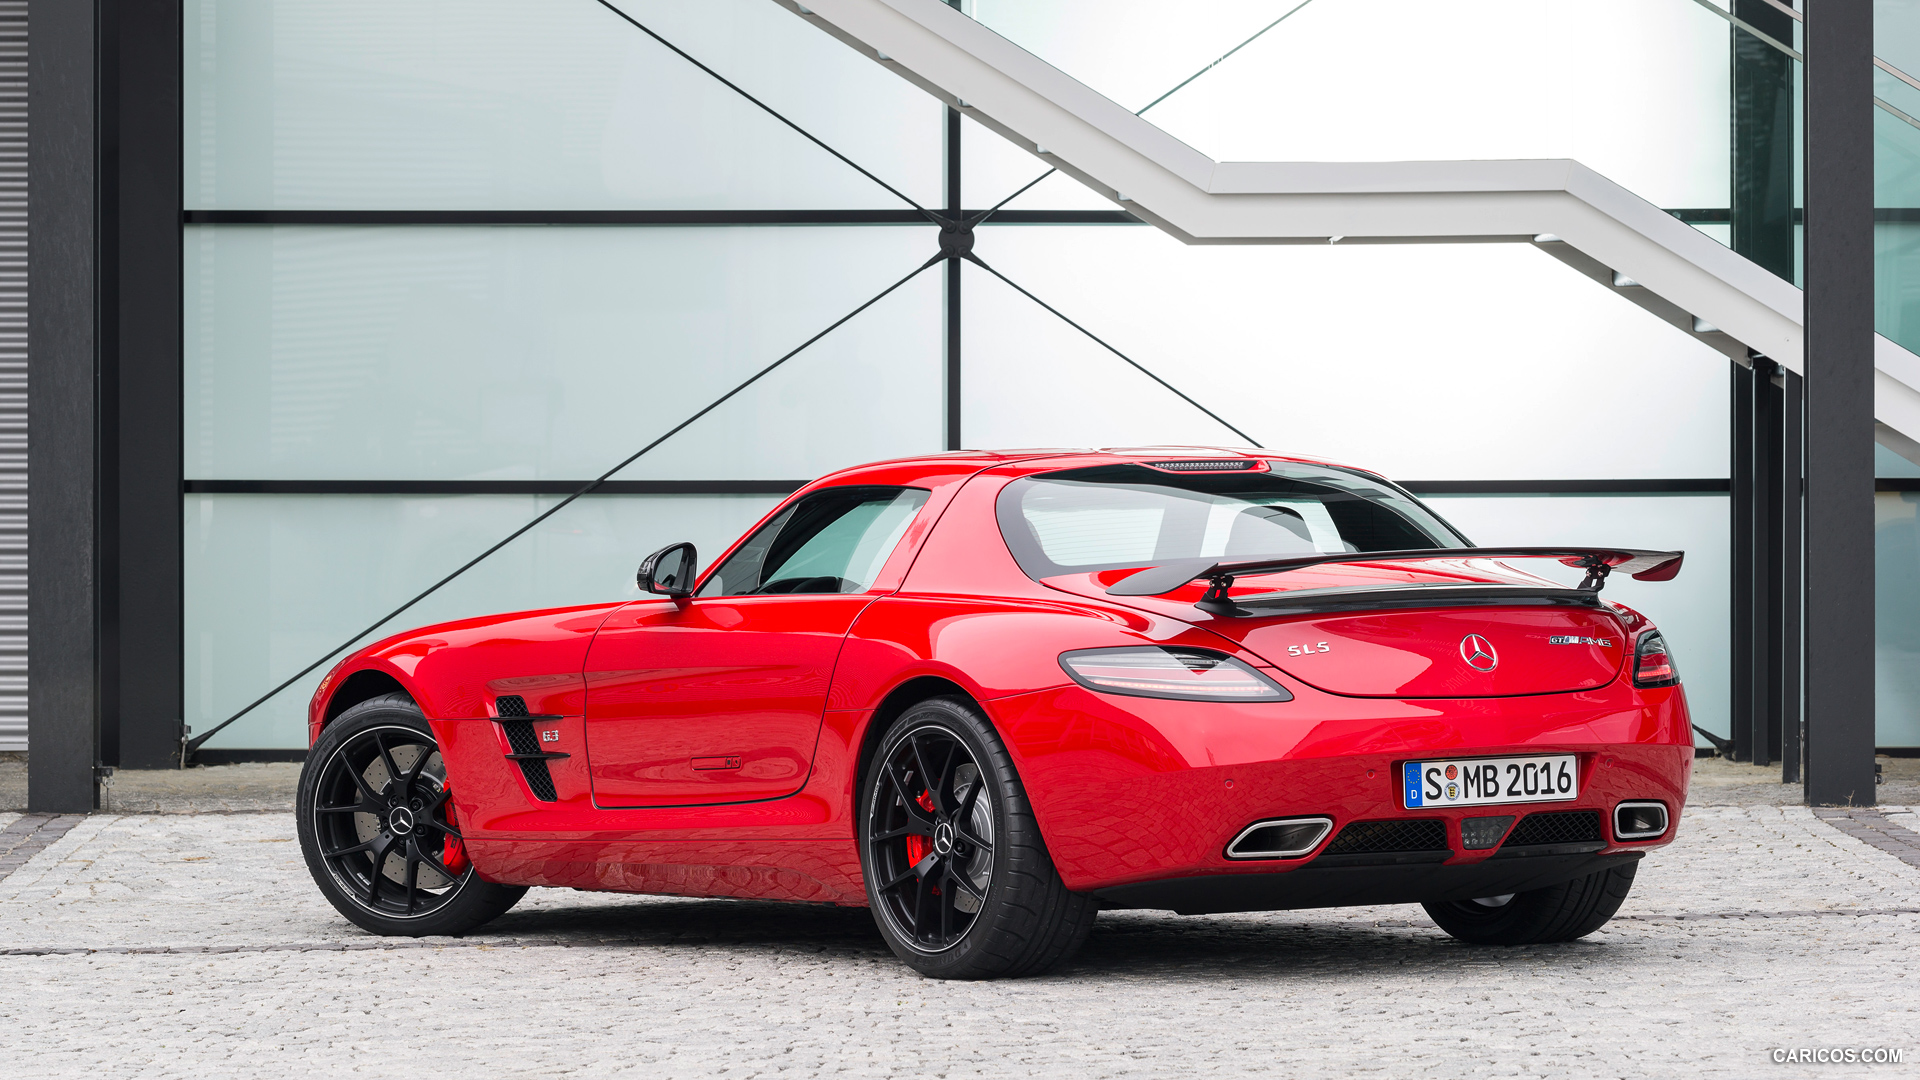  2015 Mercedes-Benz SLS AMG GT Coupe Final Edition - Rear, #11 of 41